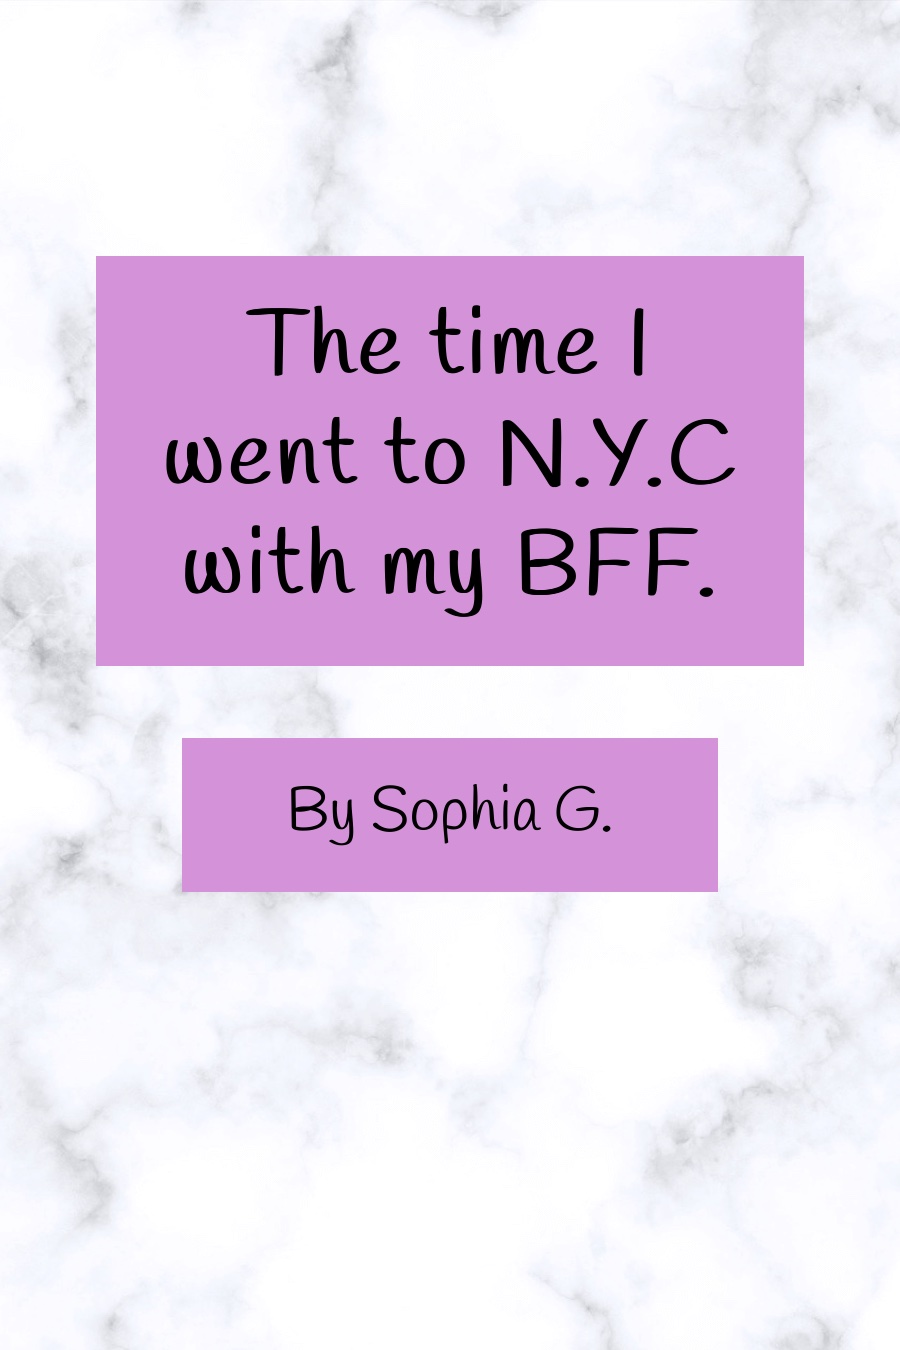 The Time I Went to NYC with my BFF by Sophia G